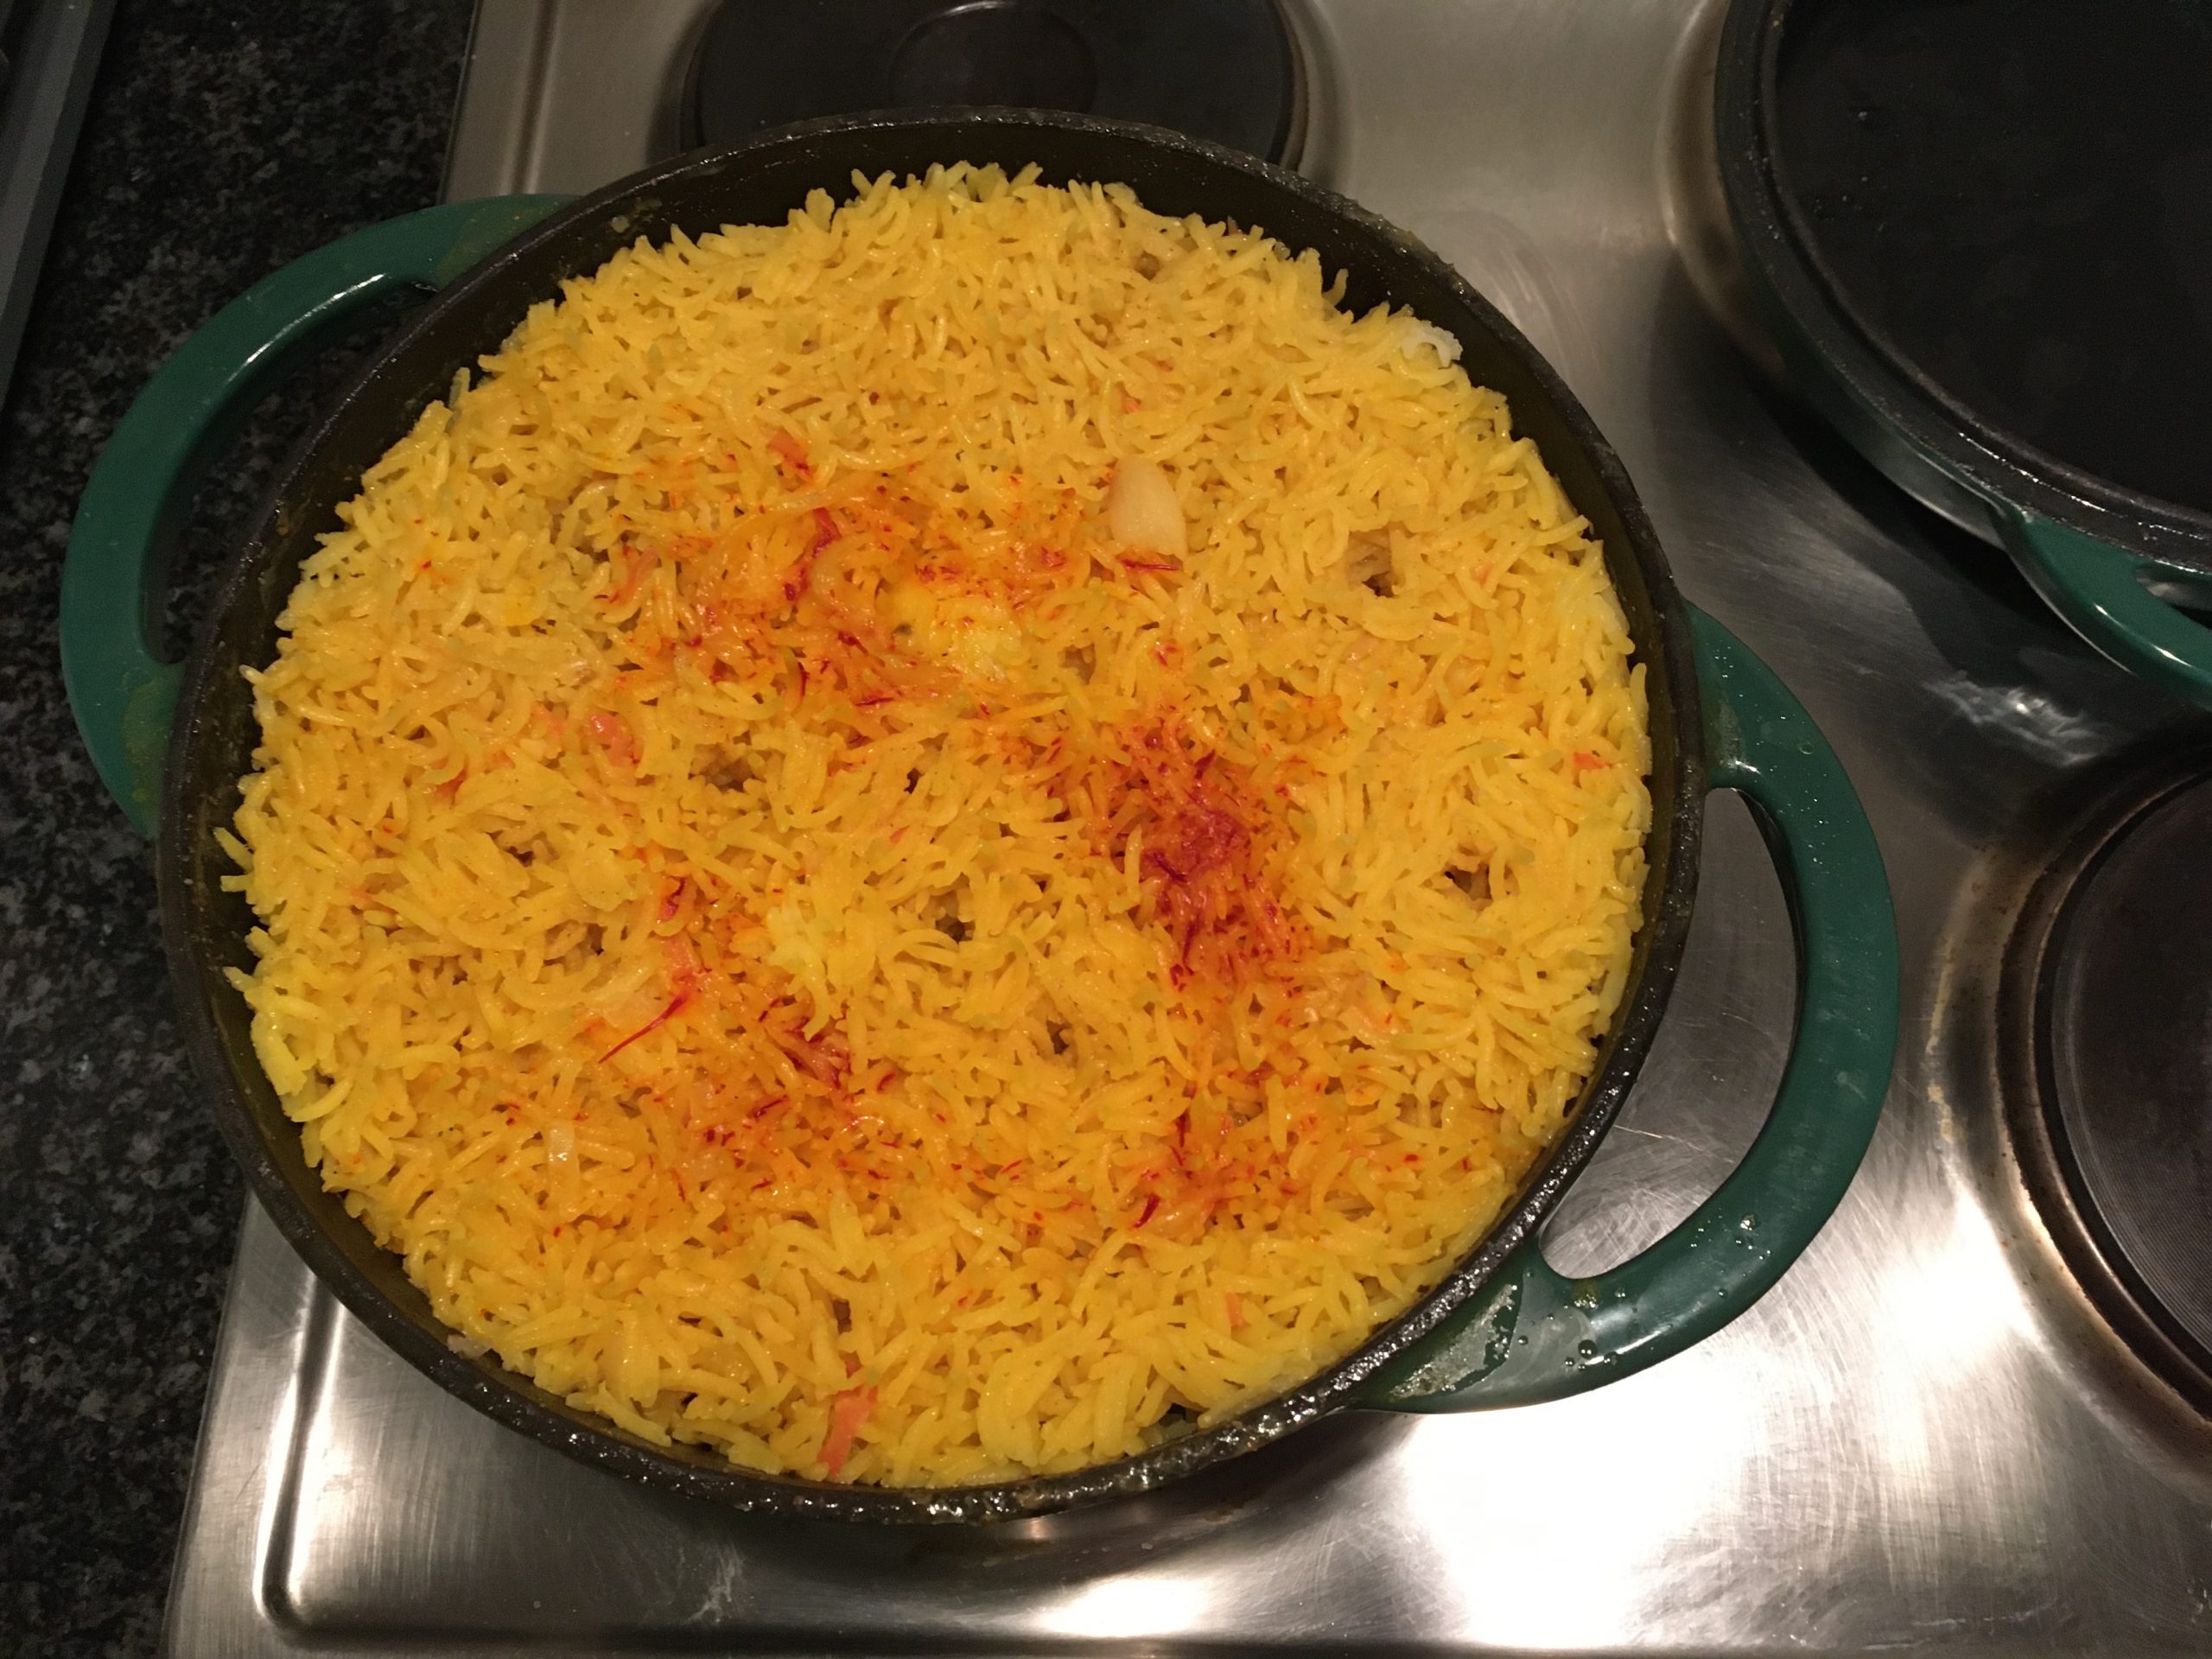 Beloved biryani: delving into some of the ingredients and techniques that make this such a delicious dish